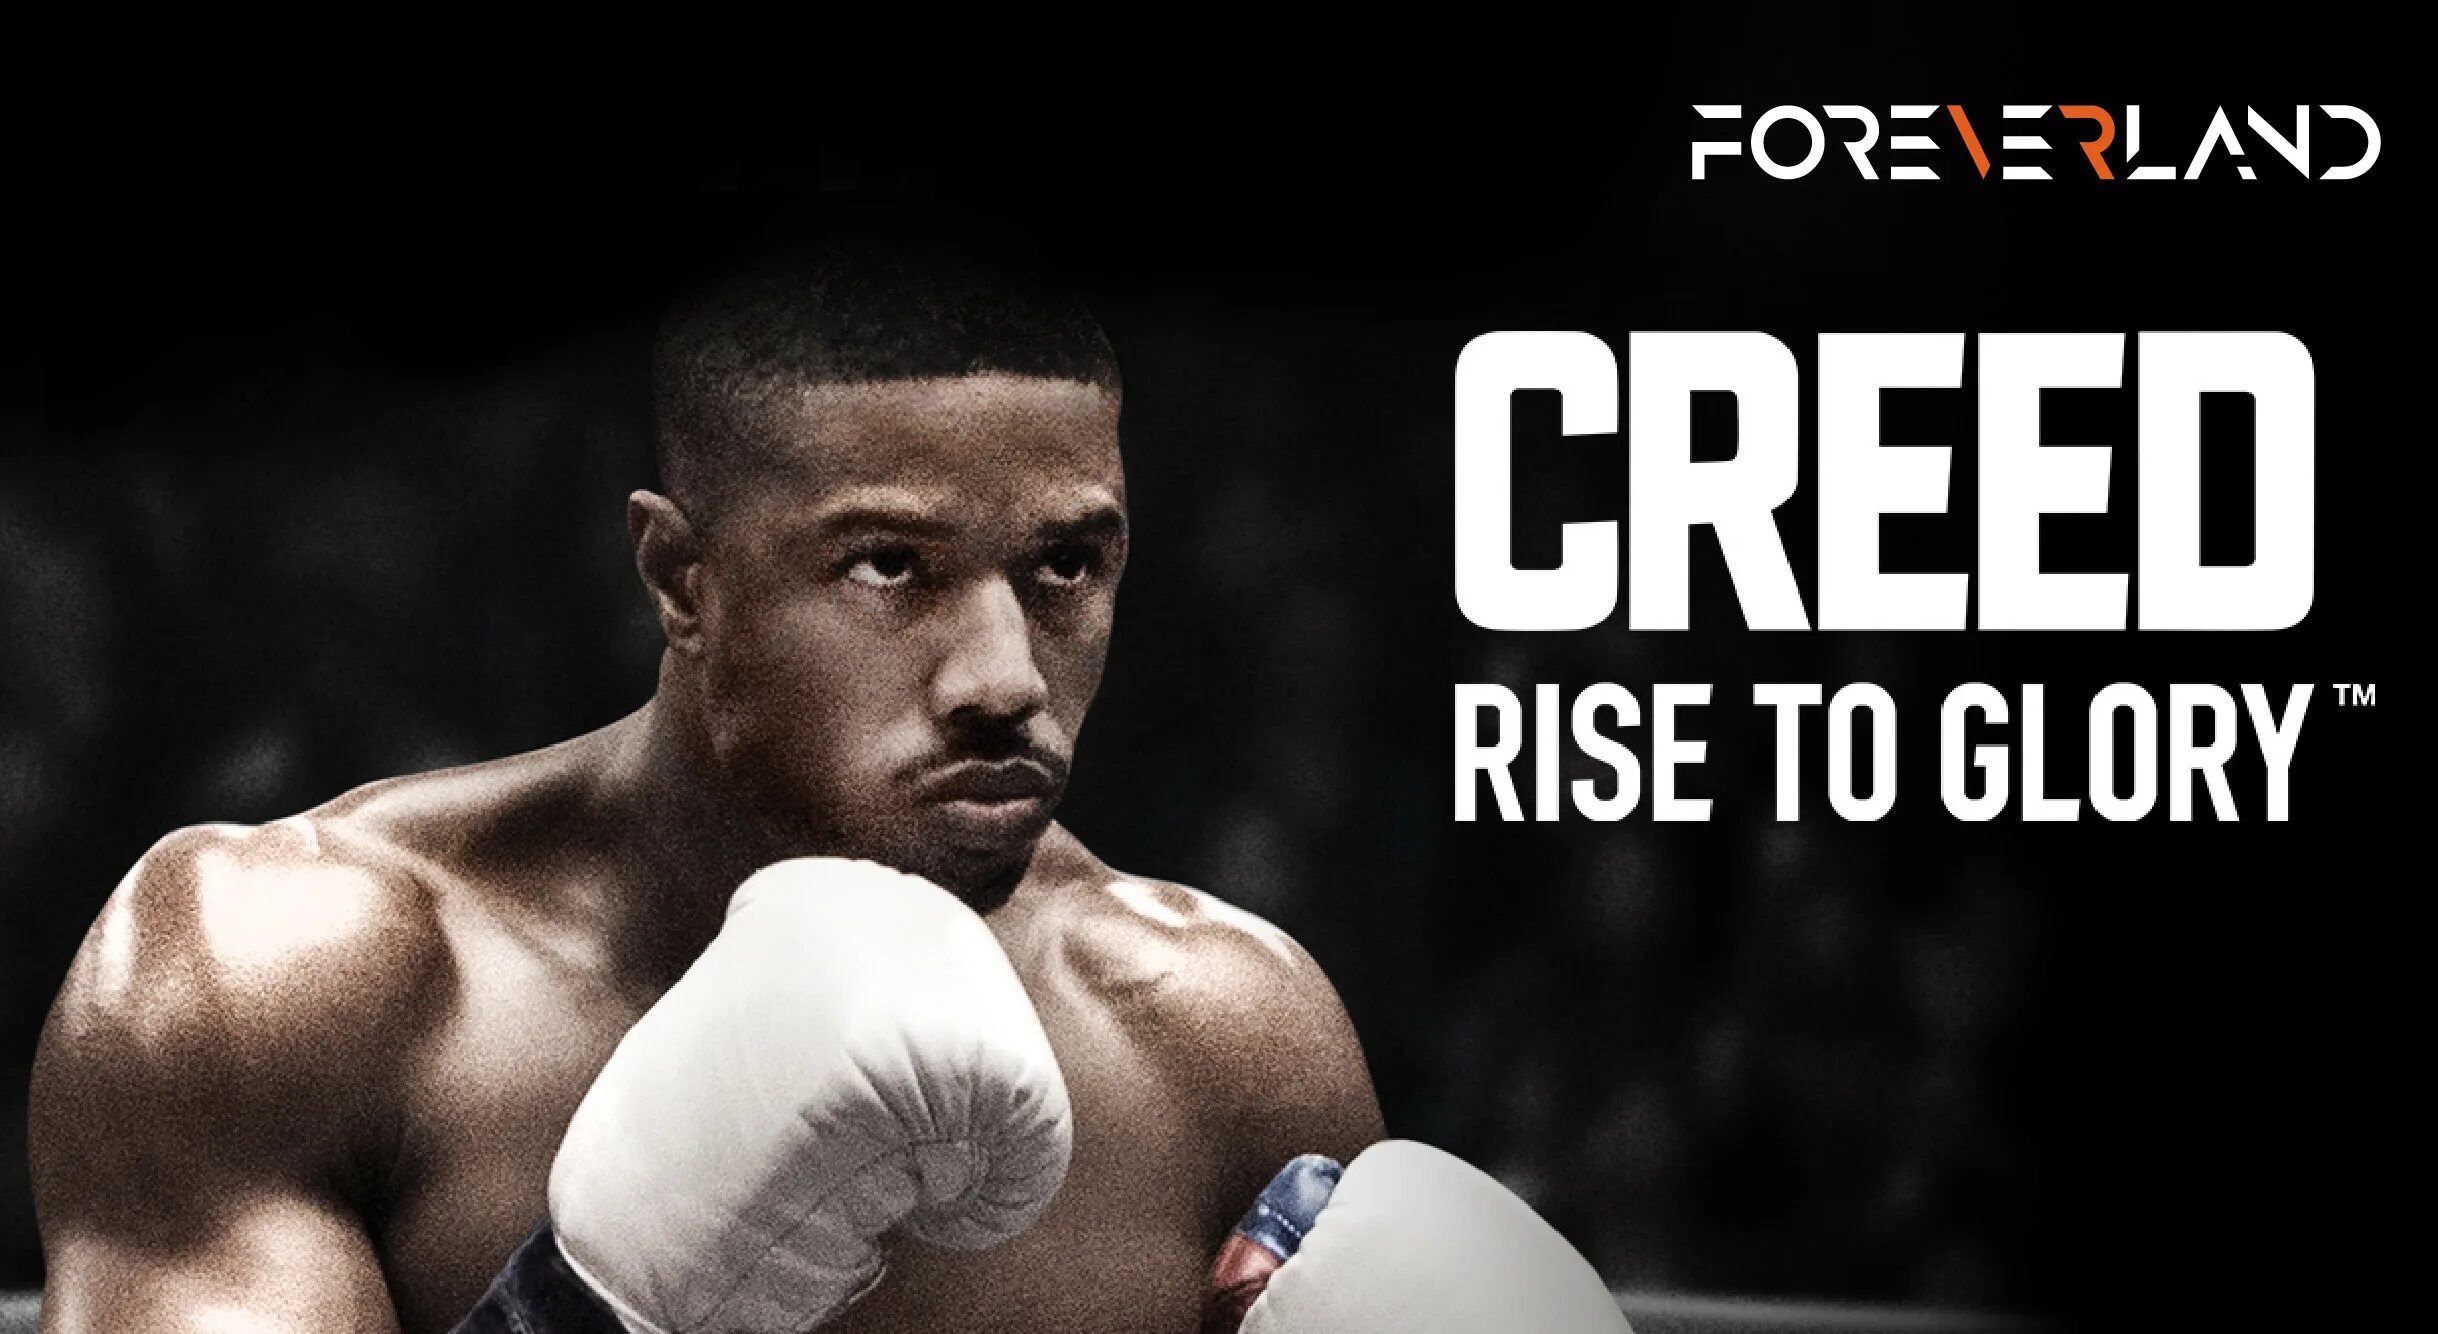 Creed Rise to Glory. Creed VR. Creed VR игра. Меню Creed: Rise to Glory.